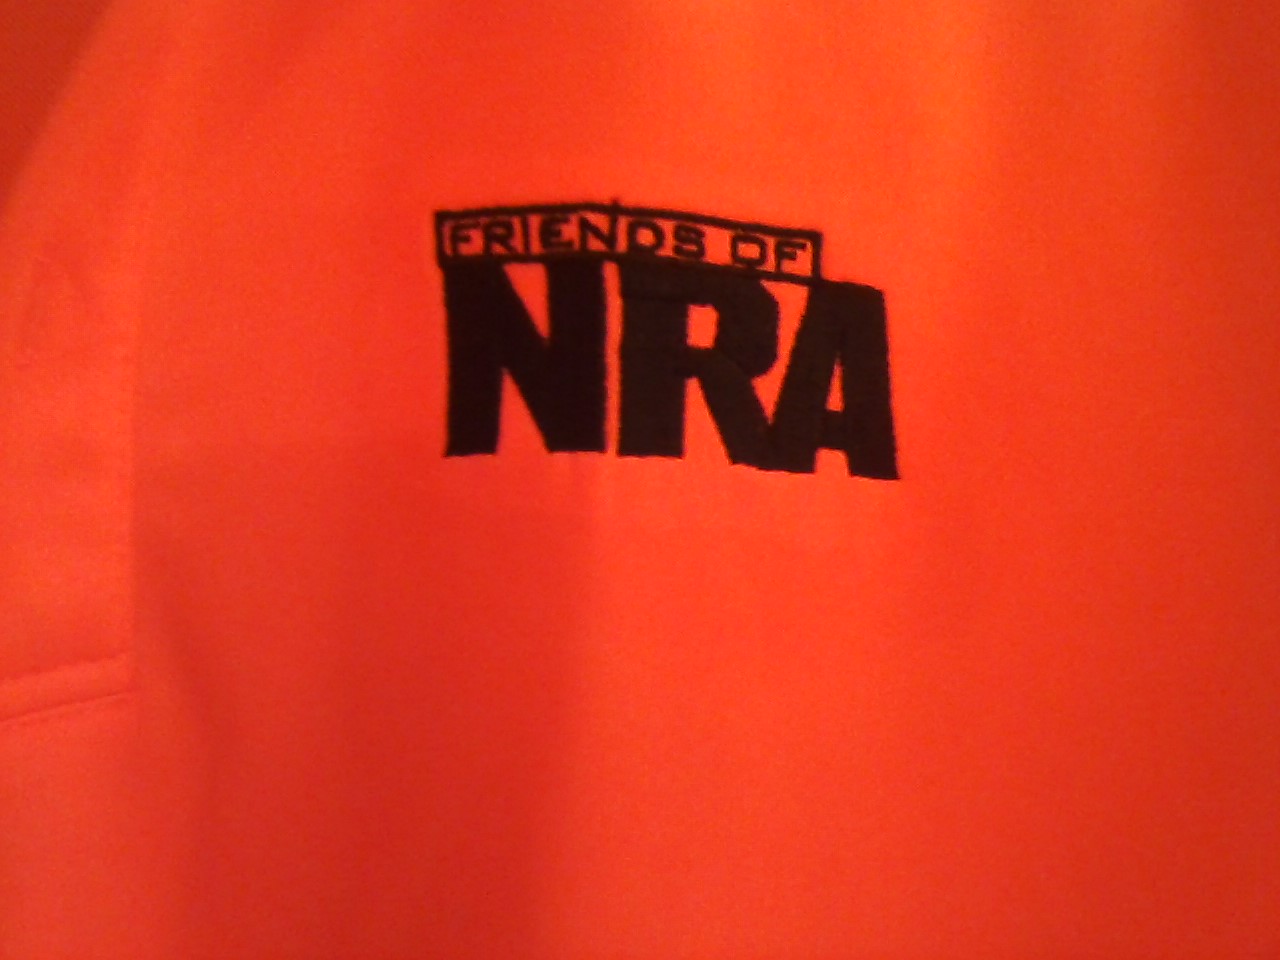 Friends of NRA 20th Anniversary shirt (1994-2014) banquet ticket and 4 stickers